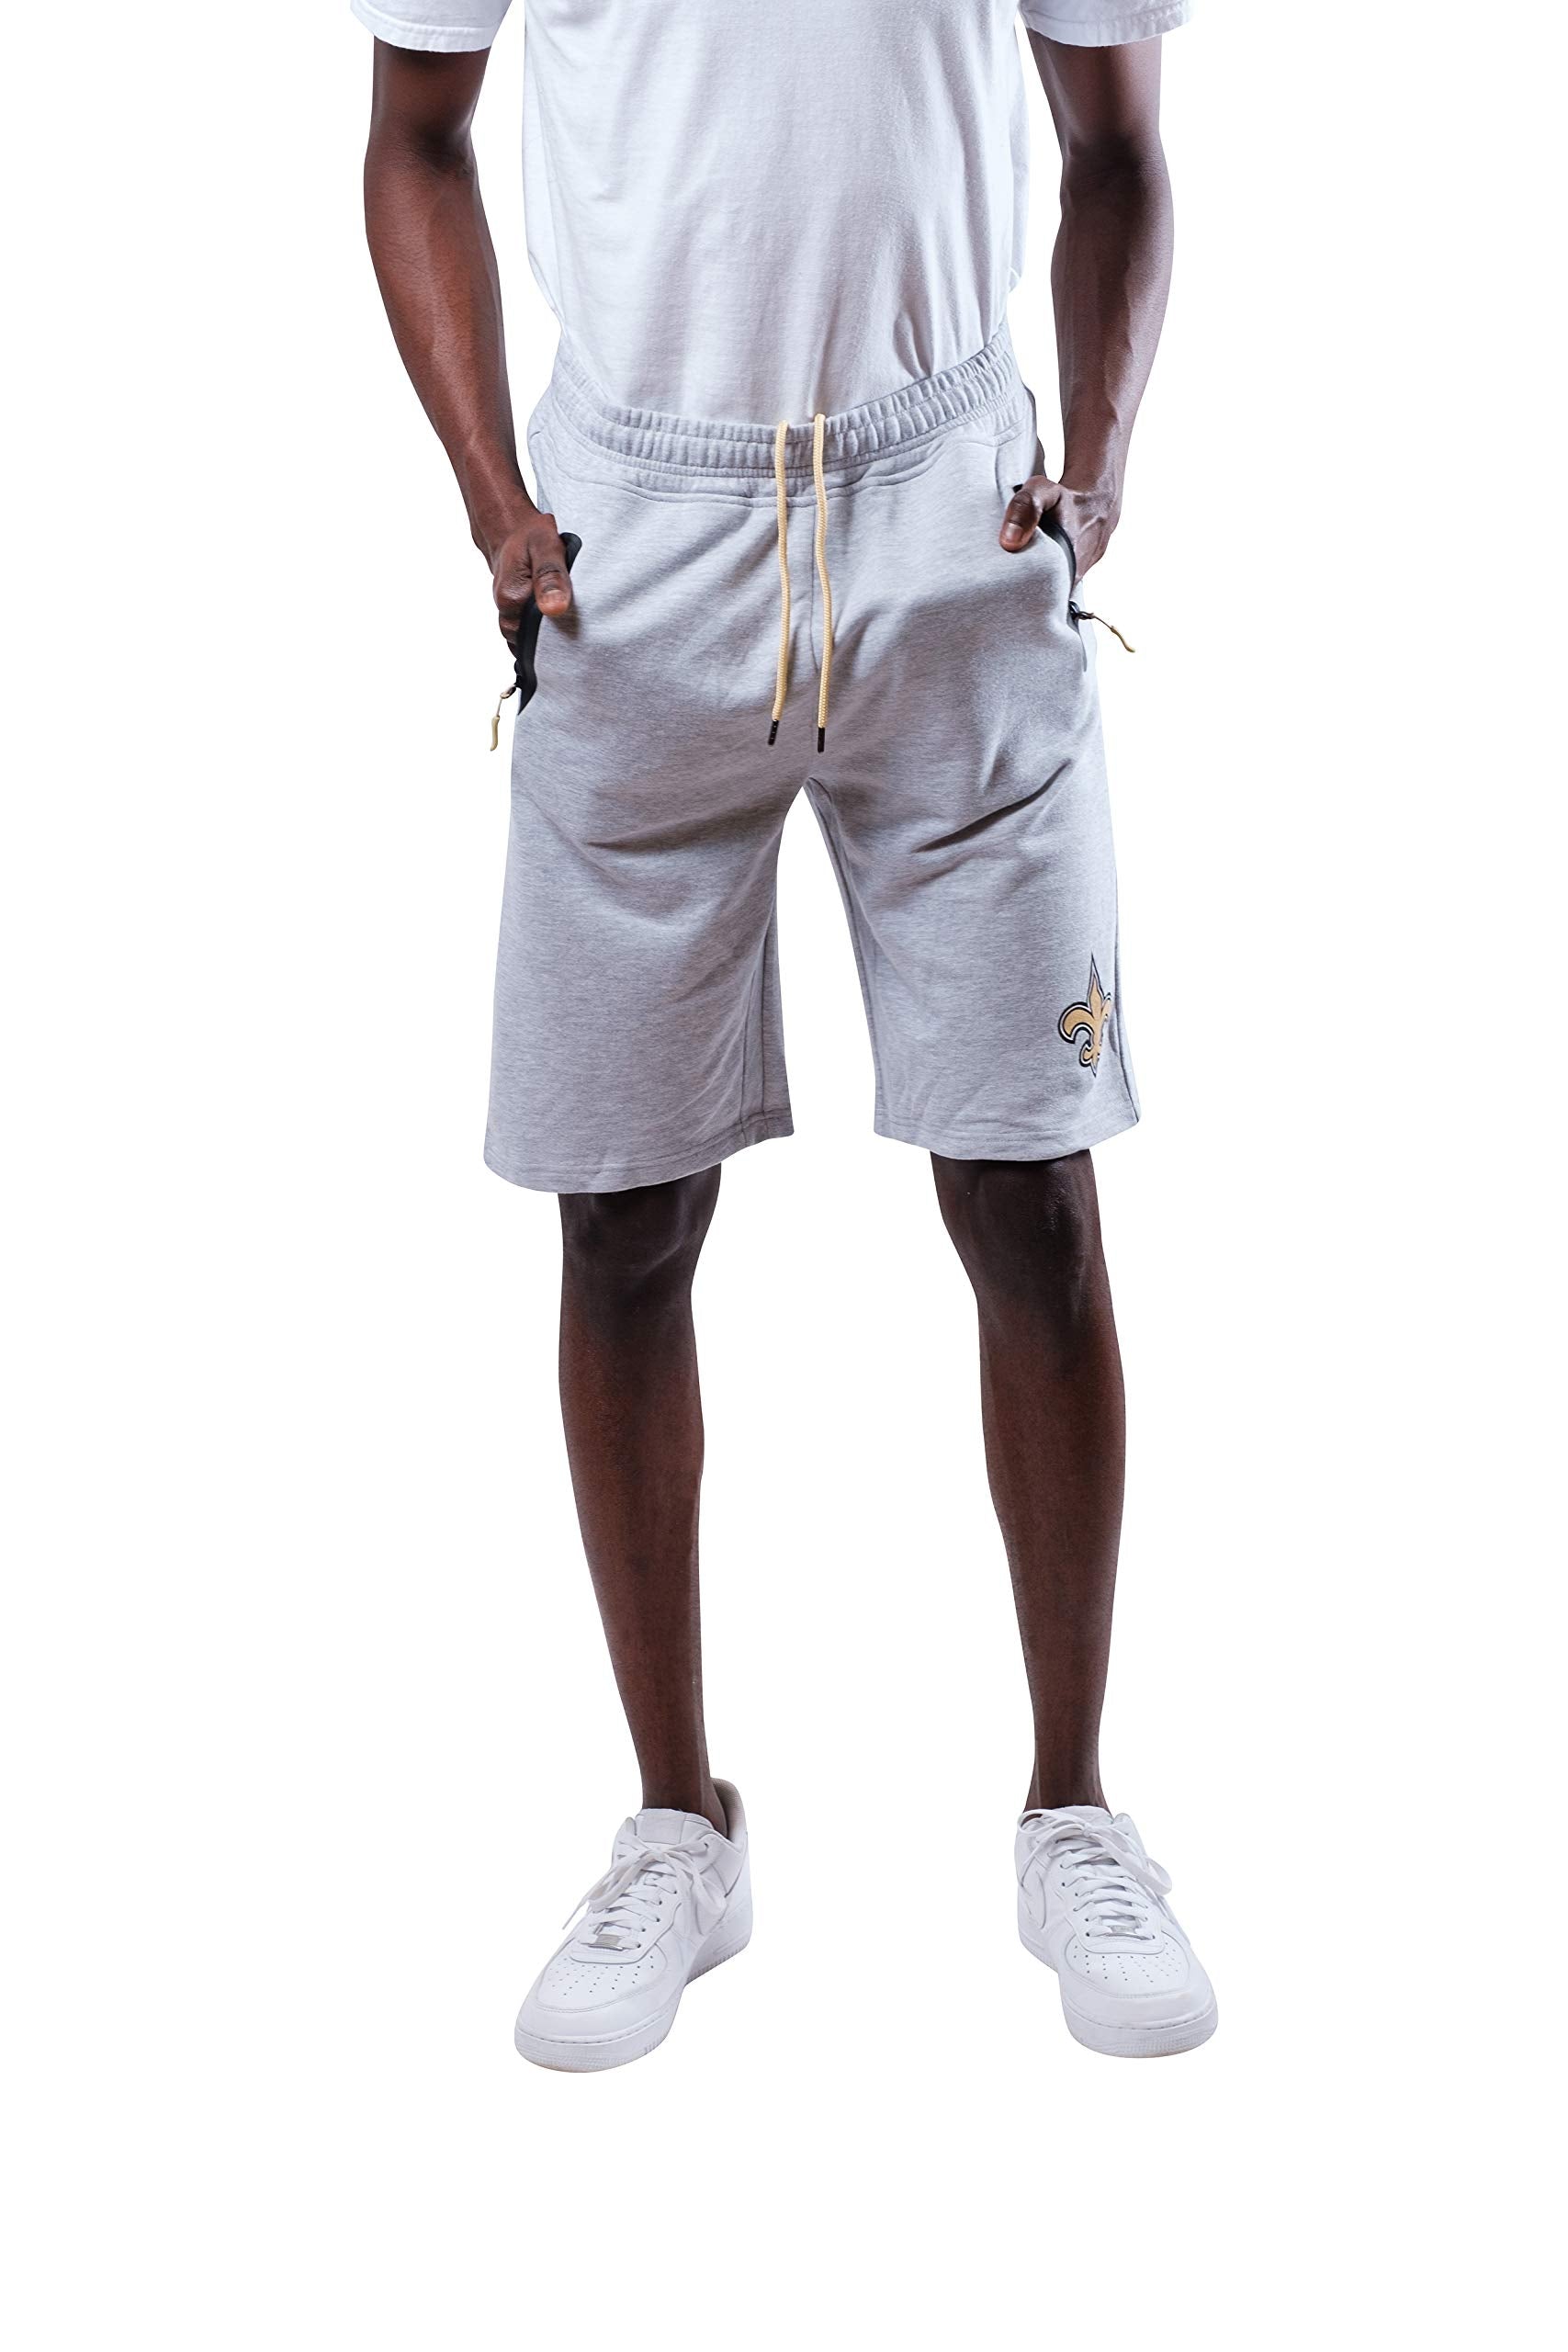 Ultra Game NFL New Orleans Saints Mens Active Lounge Shorts with Zipper Pockets|New Orleans Saints